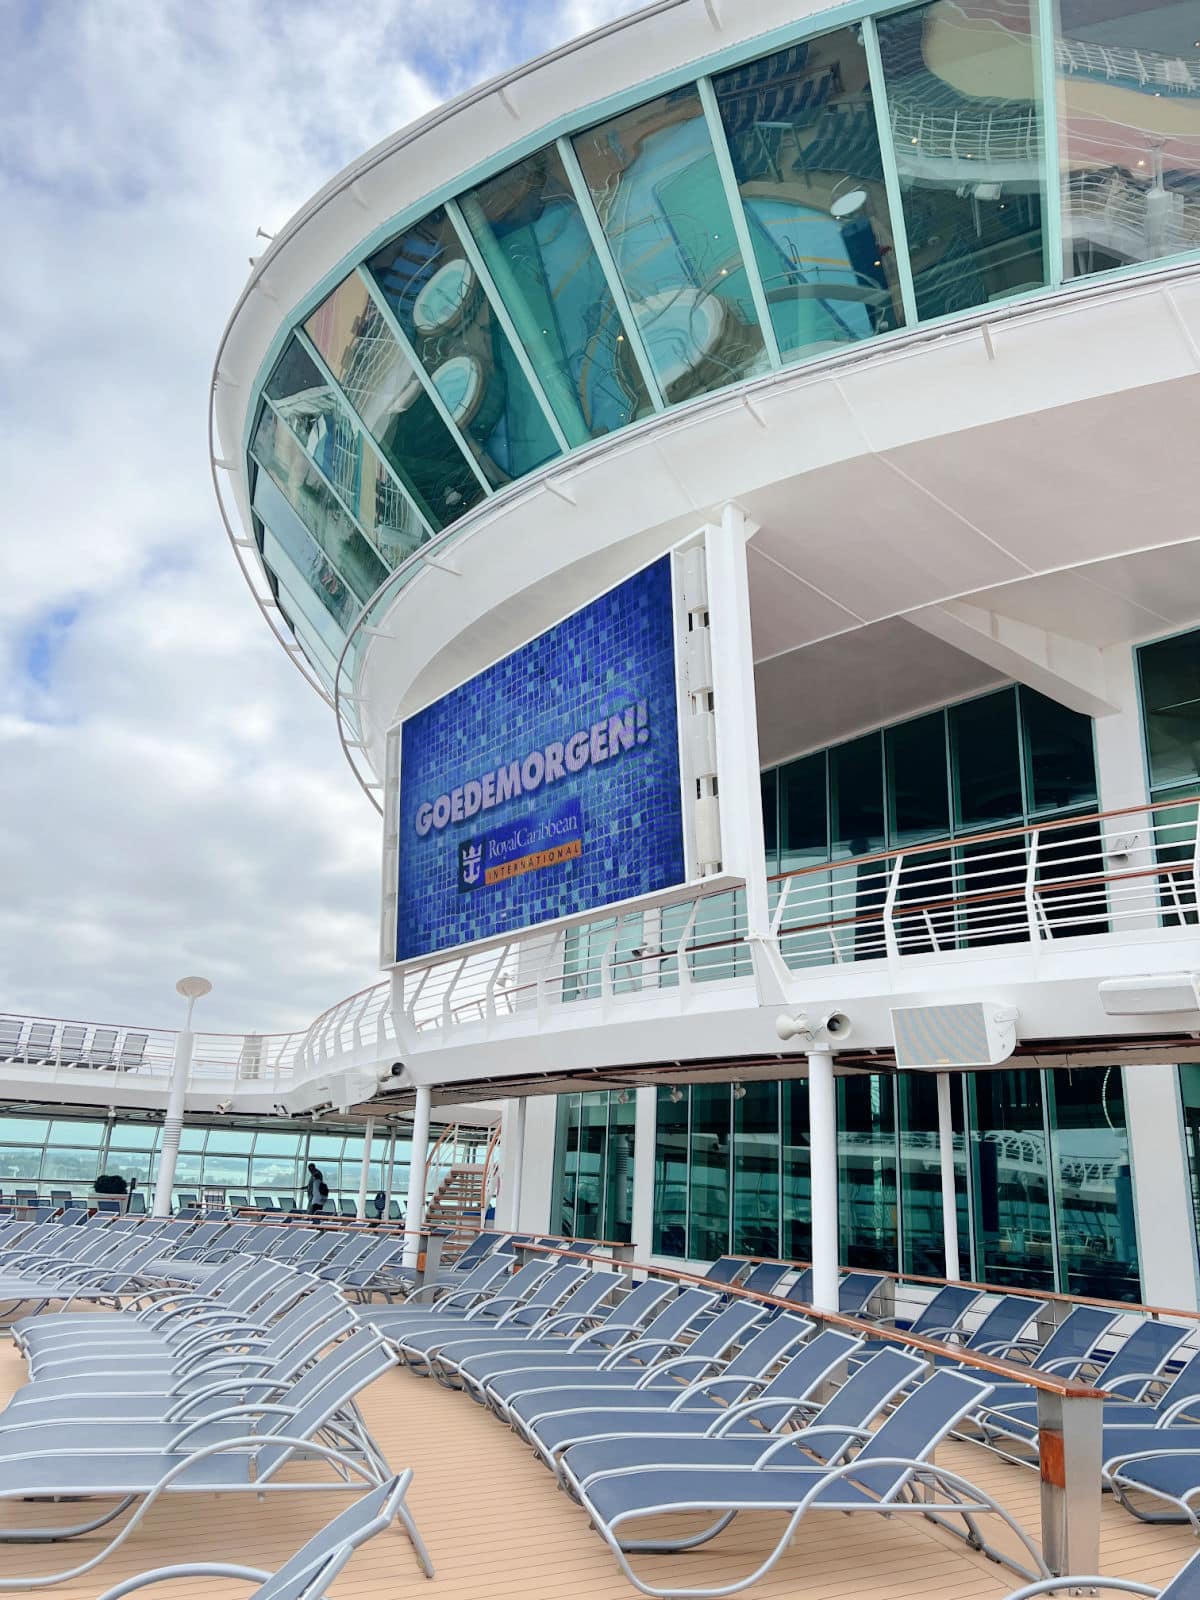 The deck of a cruise ship with lounge chairs and a large screen.